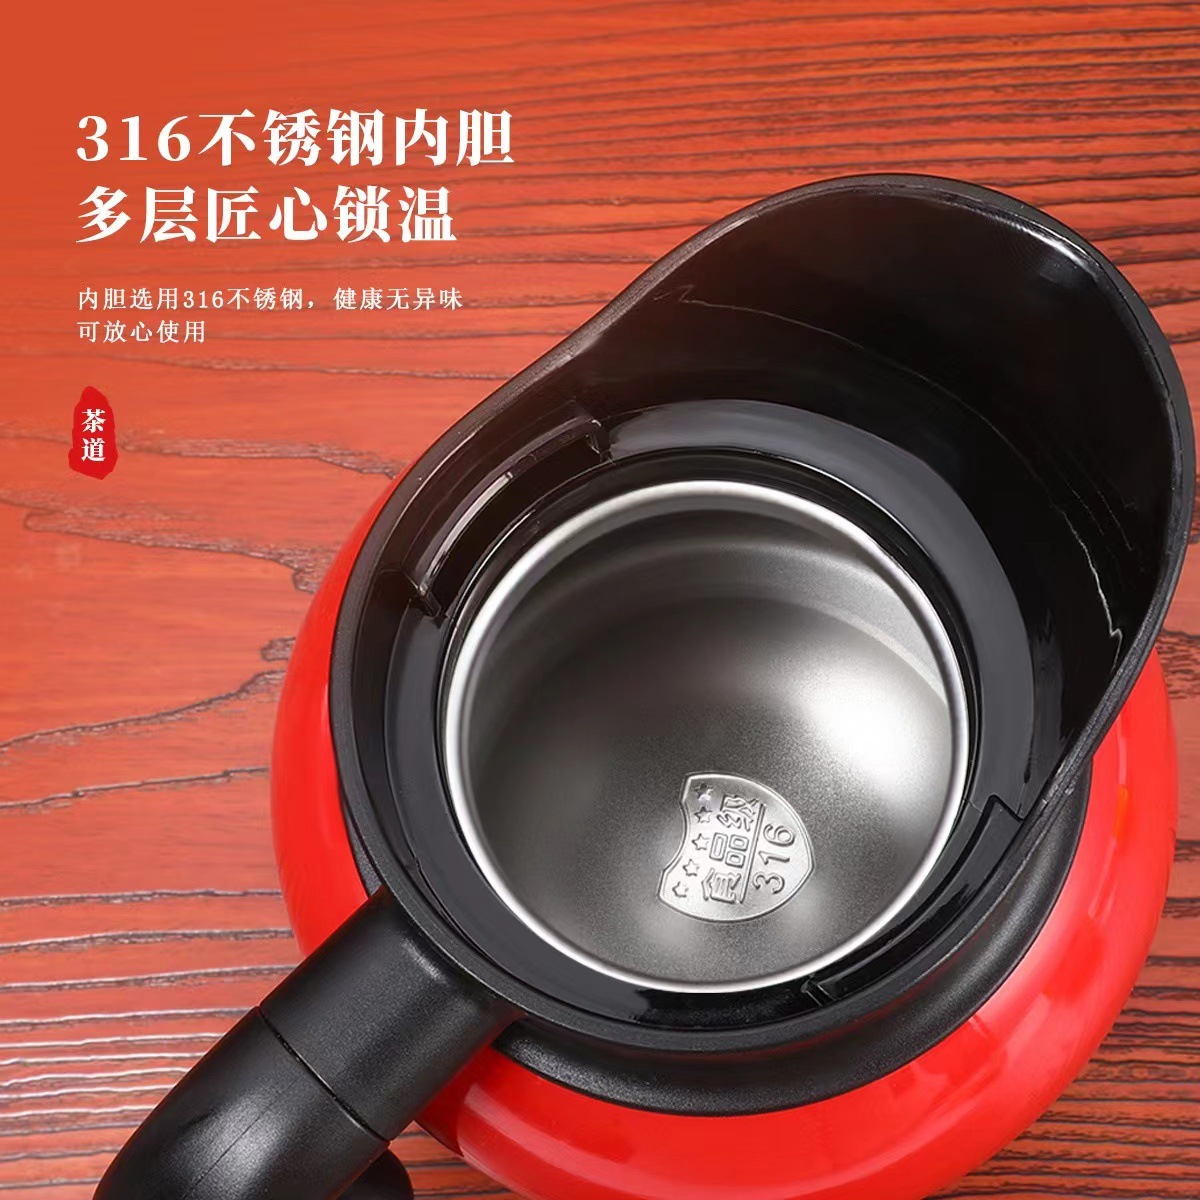 316 Stainless Steel Braised Teapot Push-Type Intelligent Temperature Measuring Stuffy Teapot Home Office Large Capacity Insulation Pot Wholesale